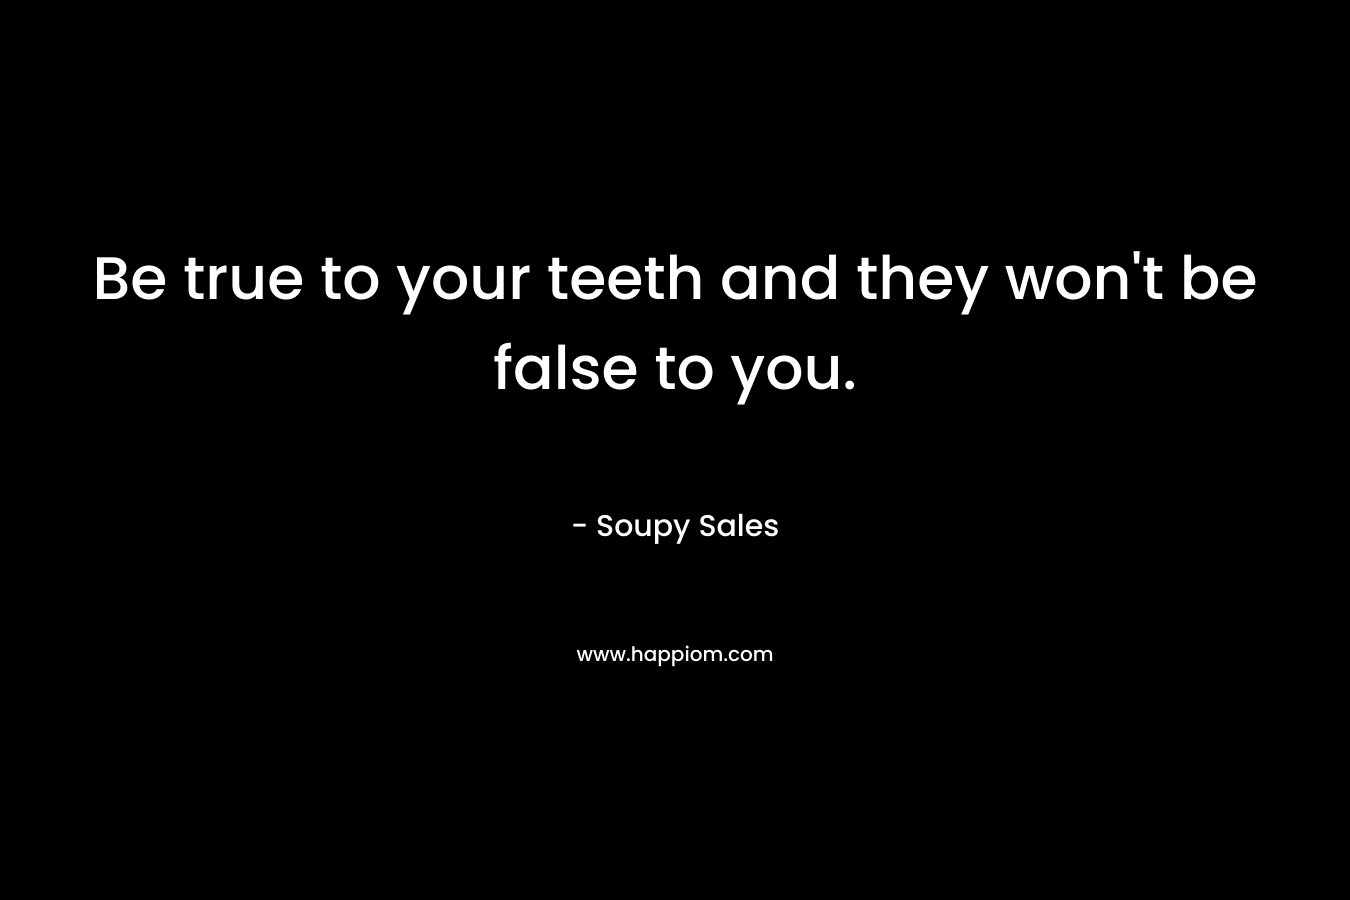 Be true to your teeth and they won’t be false to you. – Soupy Sales